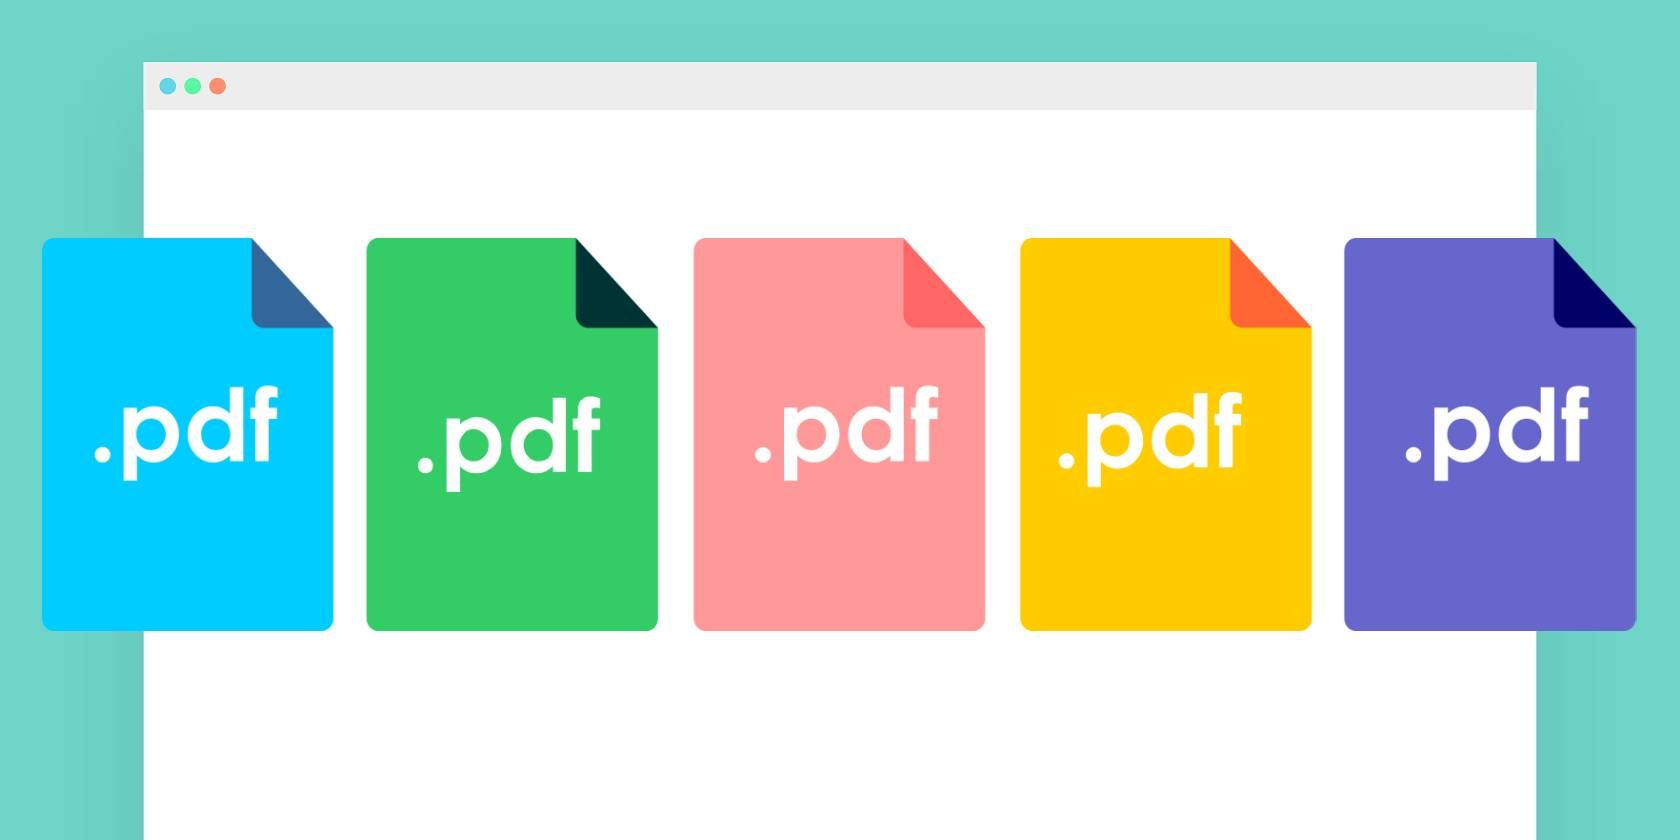 6 New Free PDF Editing Web Apps to Fix Common Problems With PDFs